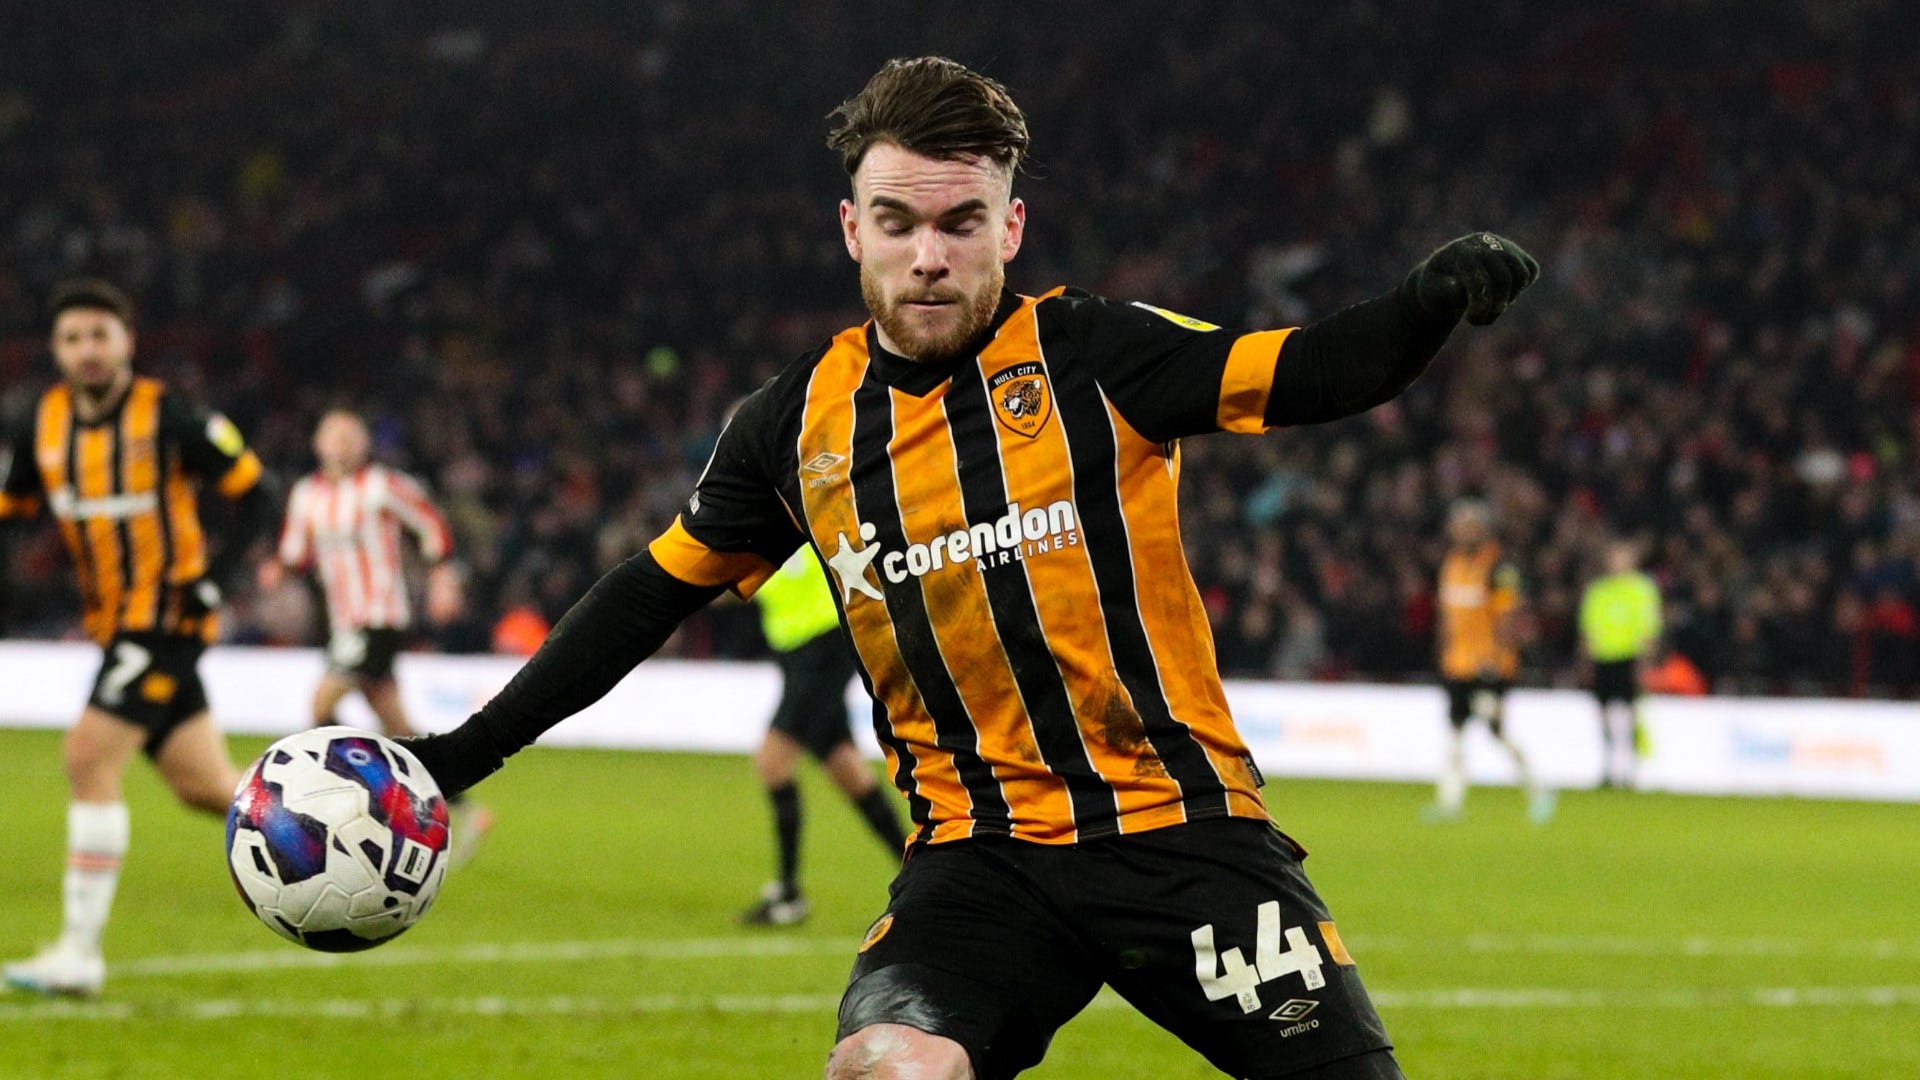 Hull City vs Bristol City Live stream, TV channel, kick-off time and where to watch Goal US